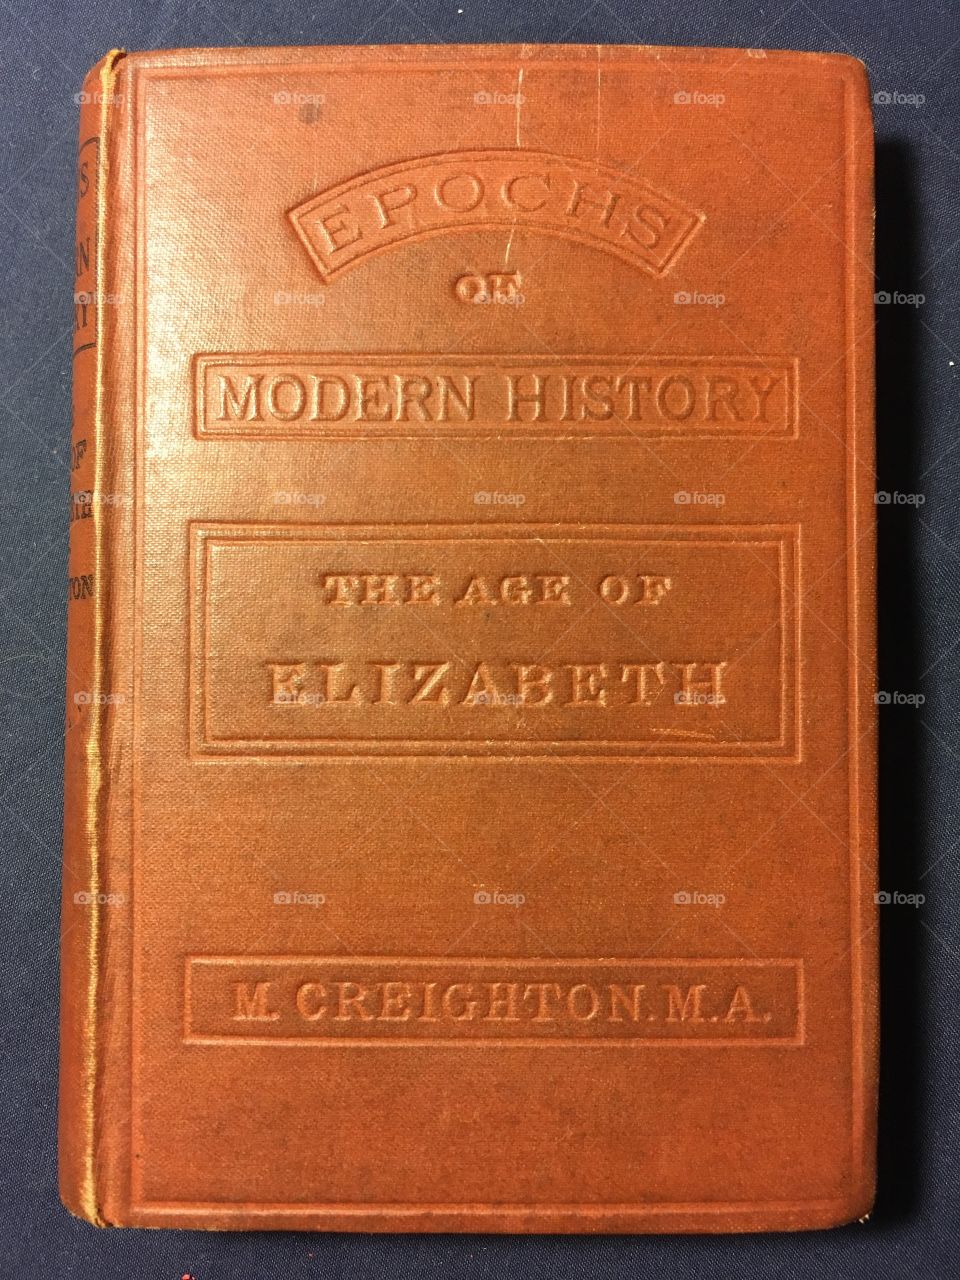 Epochs of modern History - The Age of Elizabeth book from 1896